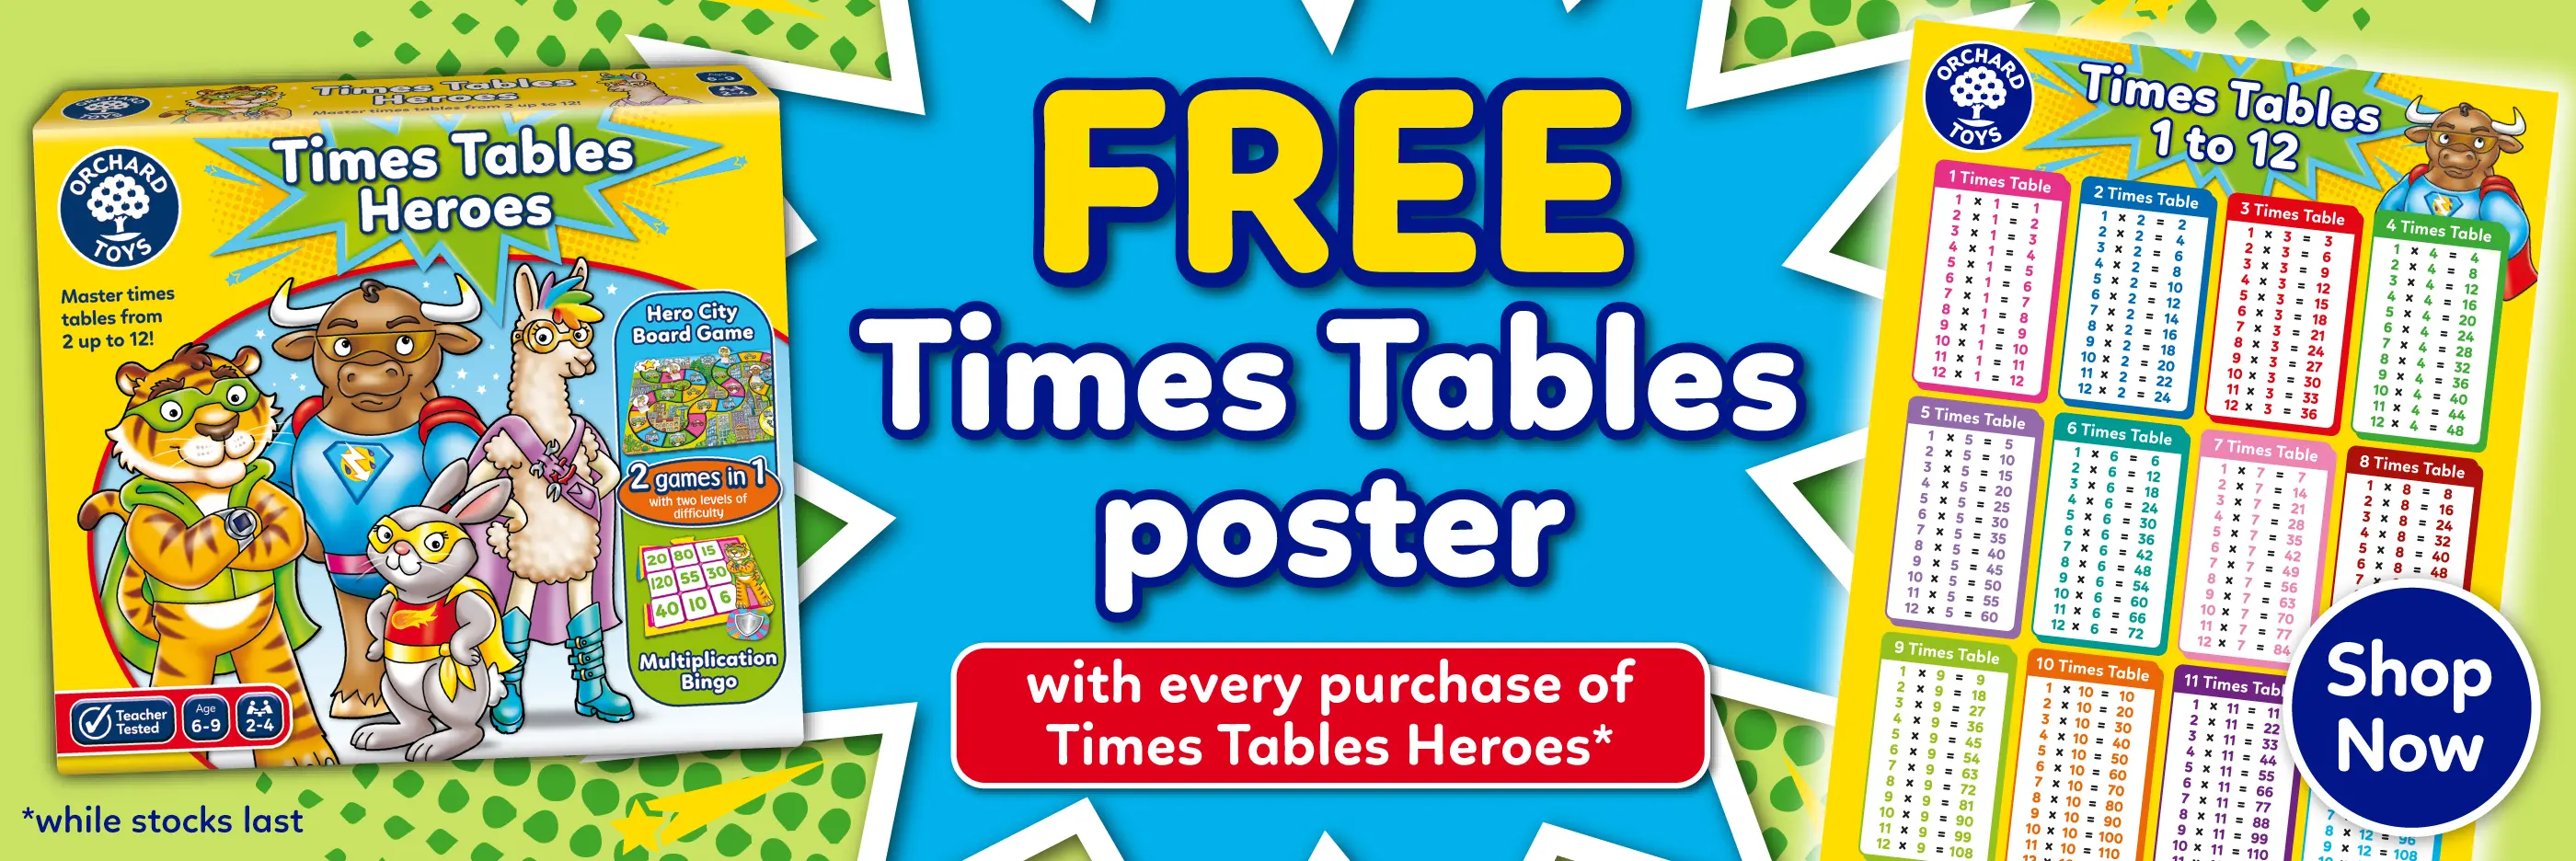 Free Times Tables Poster